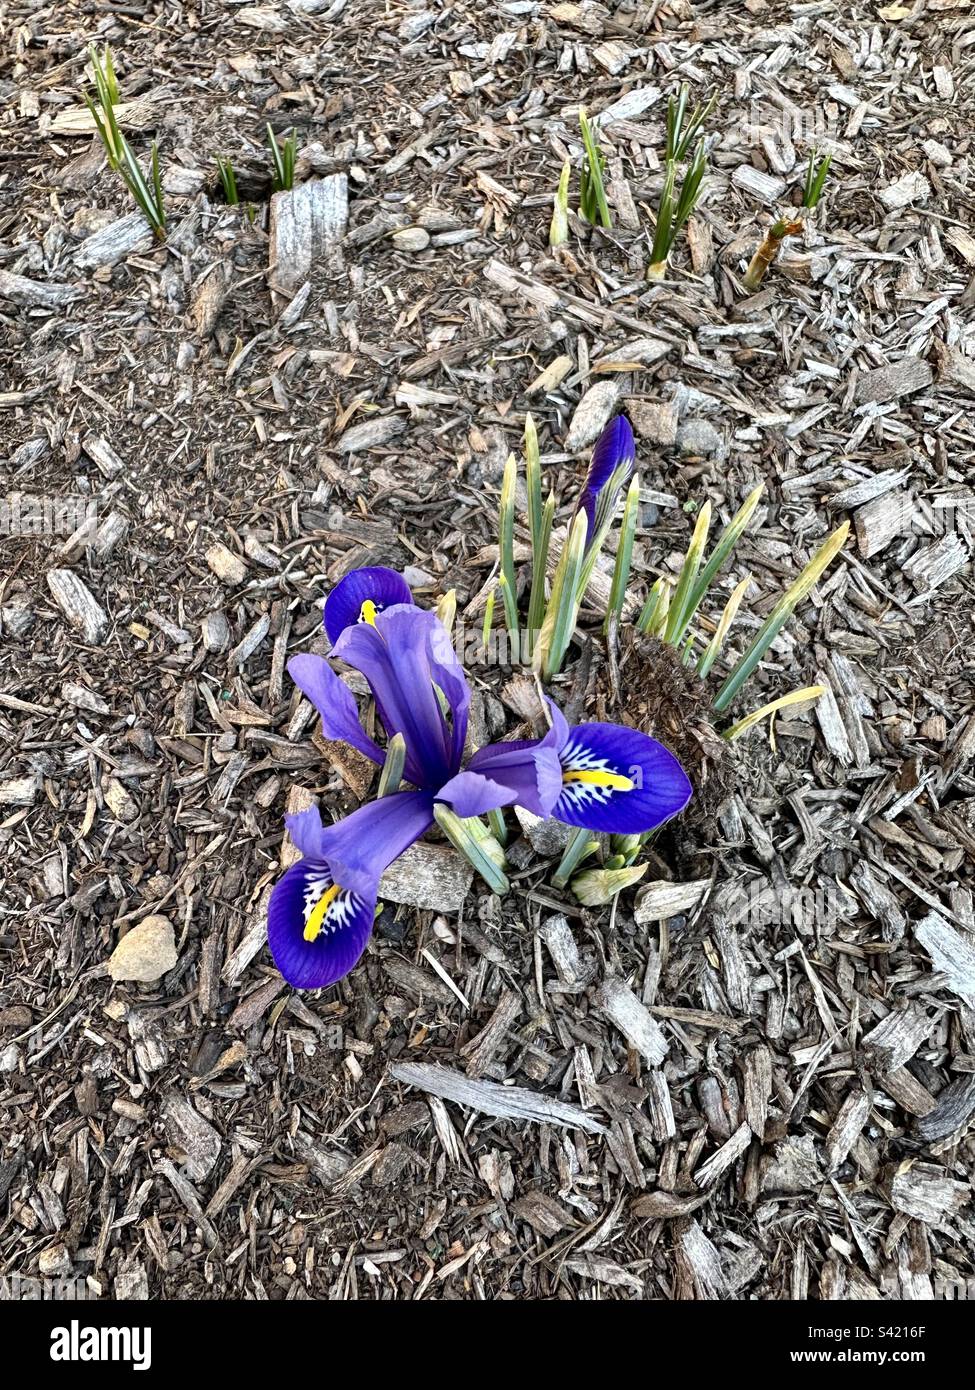 Small, violet iris, blooming amidst the mulch in a small, New England garden Stock Photo